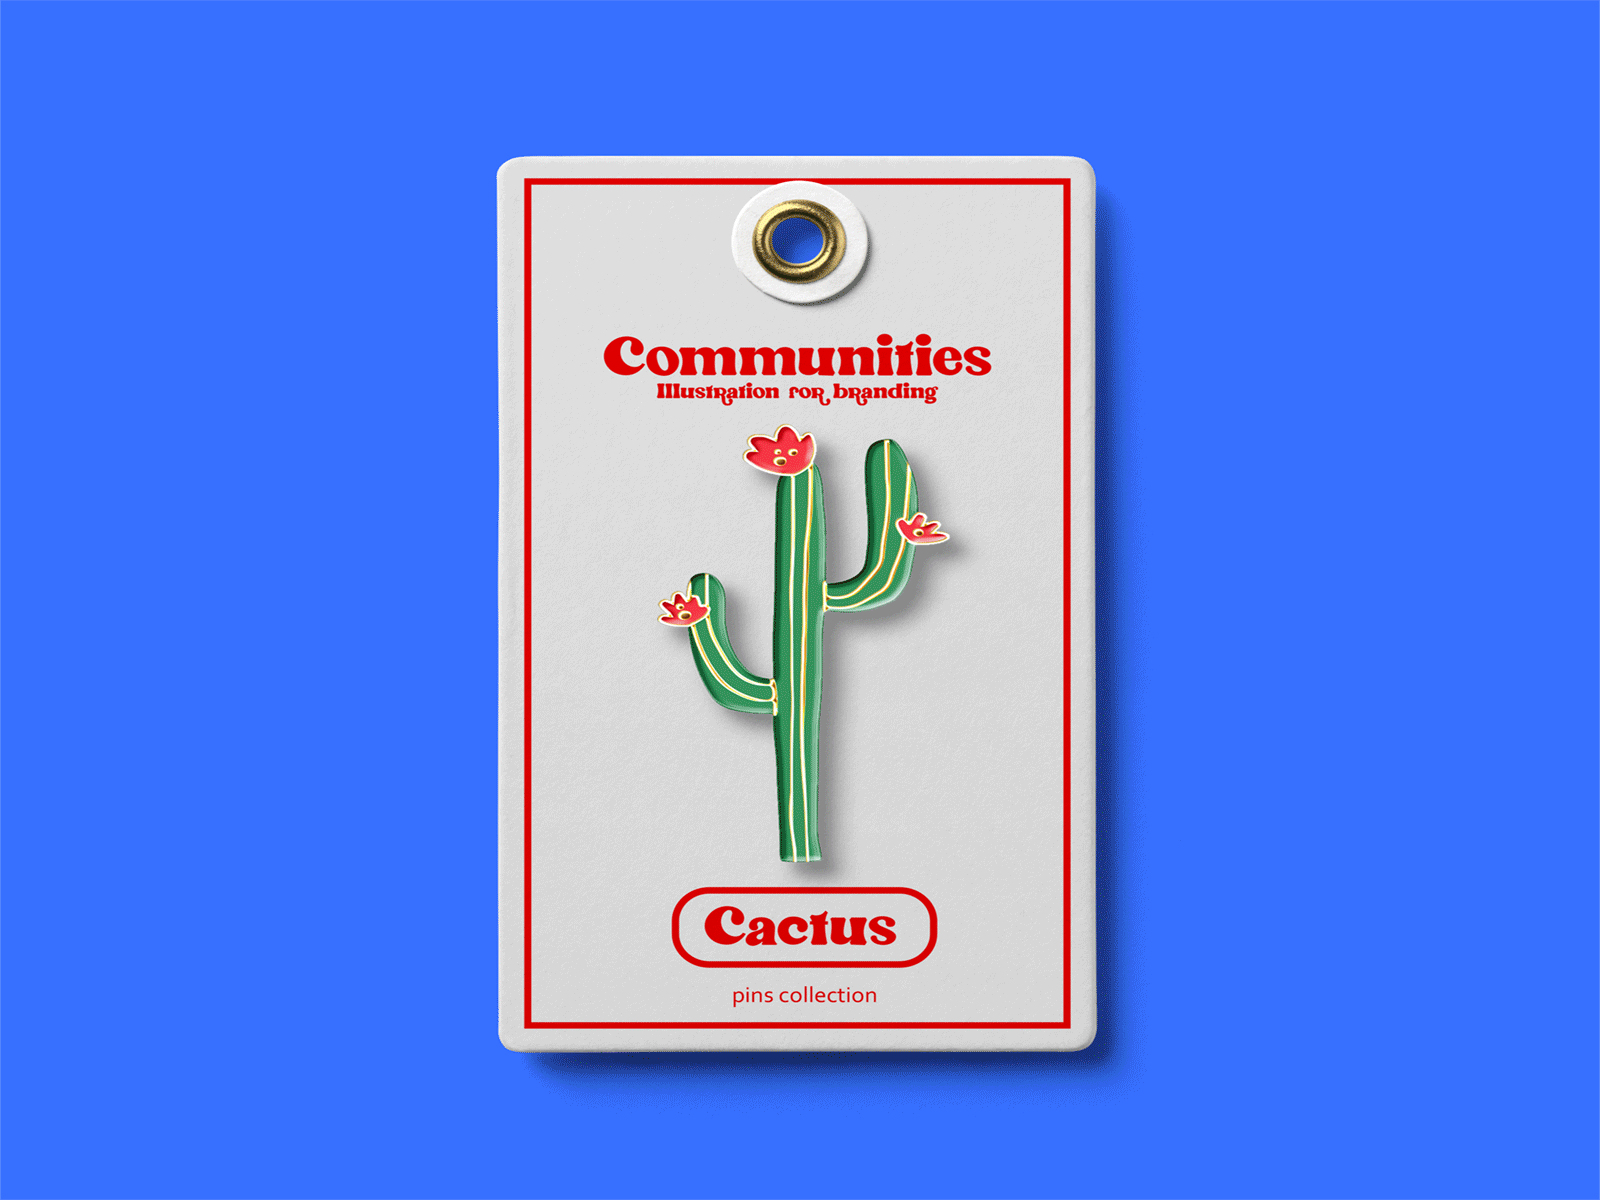 Communities - Pins collection bird branding cactus cartoon character design color cool fun illustration pin pins product design sneakers star vector